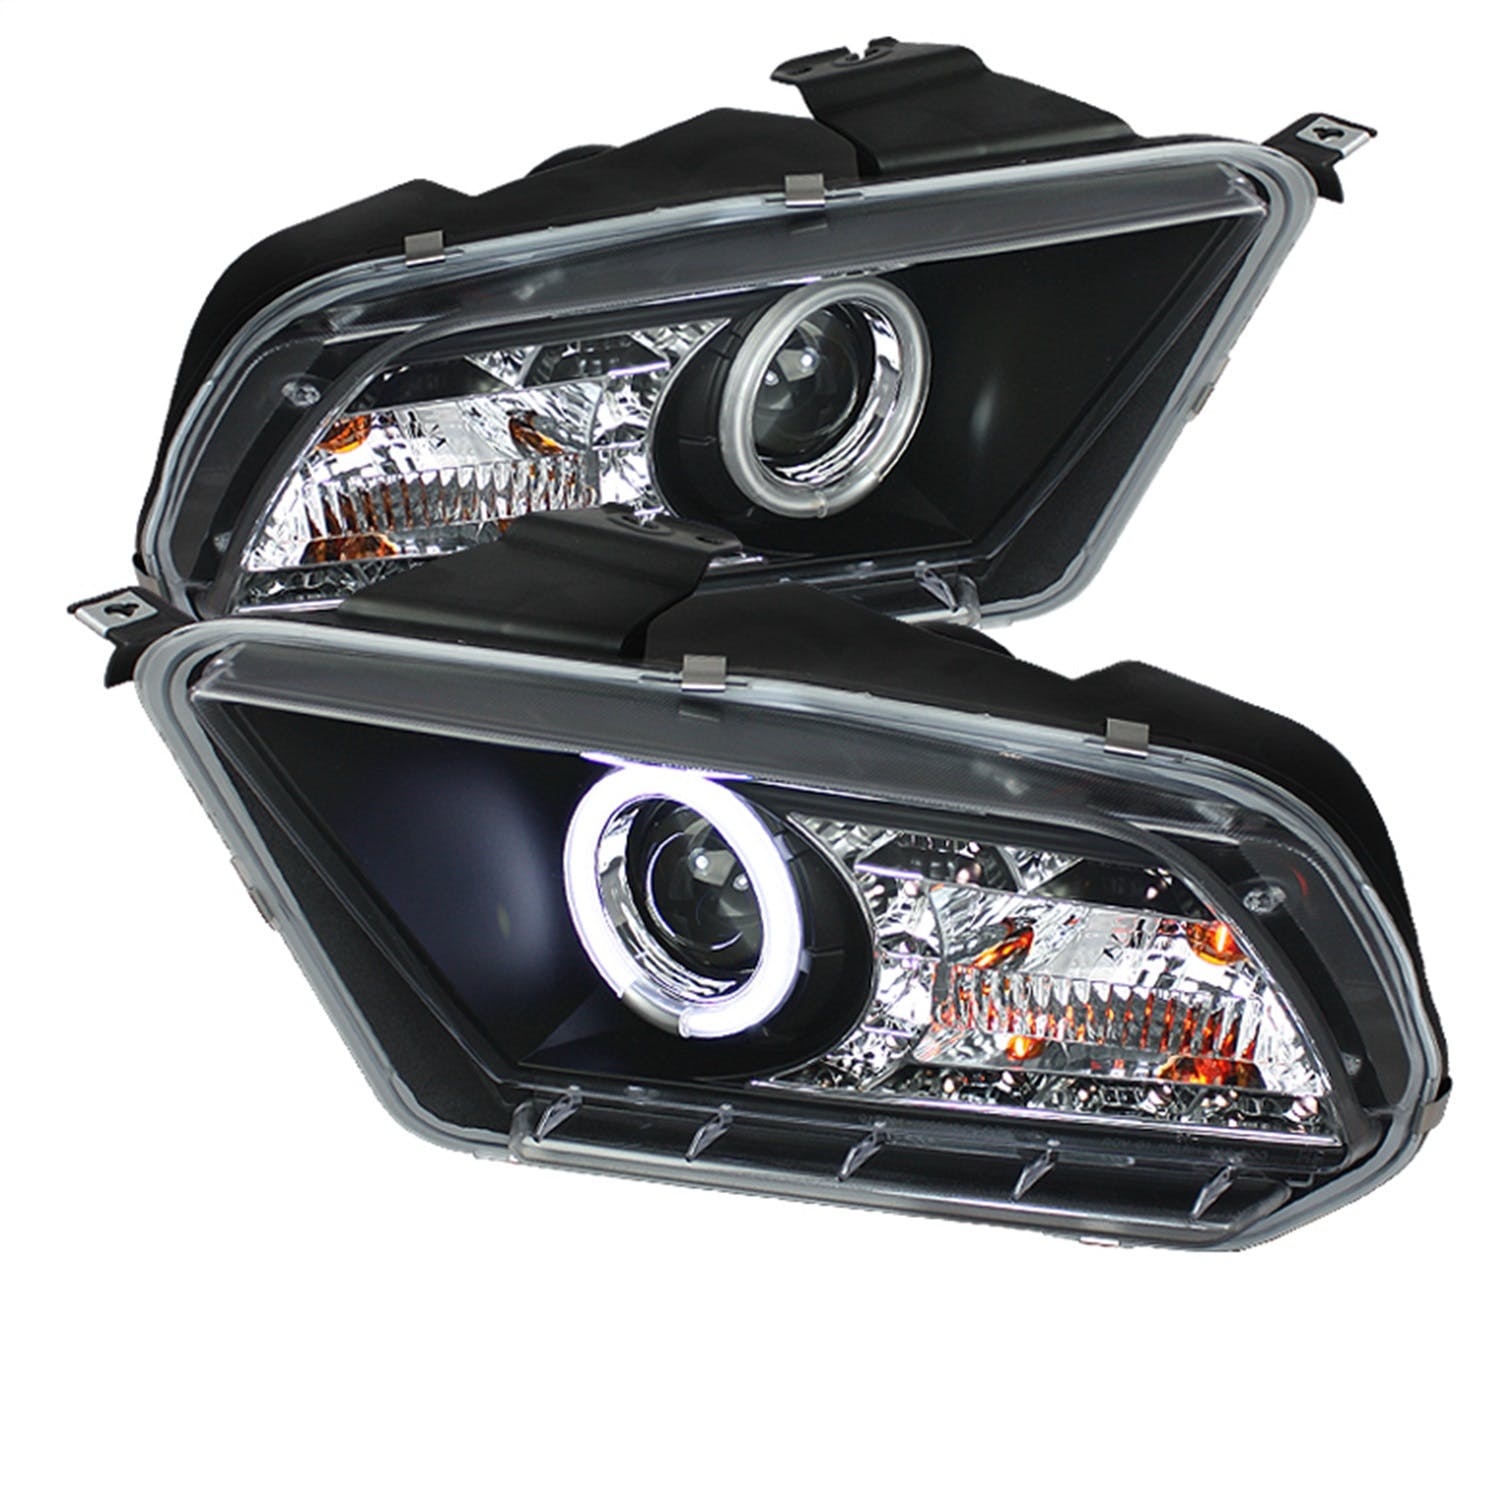 Spyder Auto 5039330 (Spyder) Ford Mustang 10-13 Projector Headlights-Halogen Model Only ( Not Compat